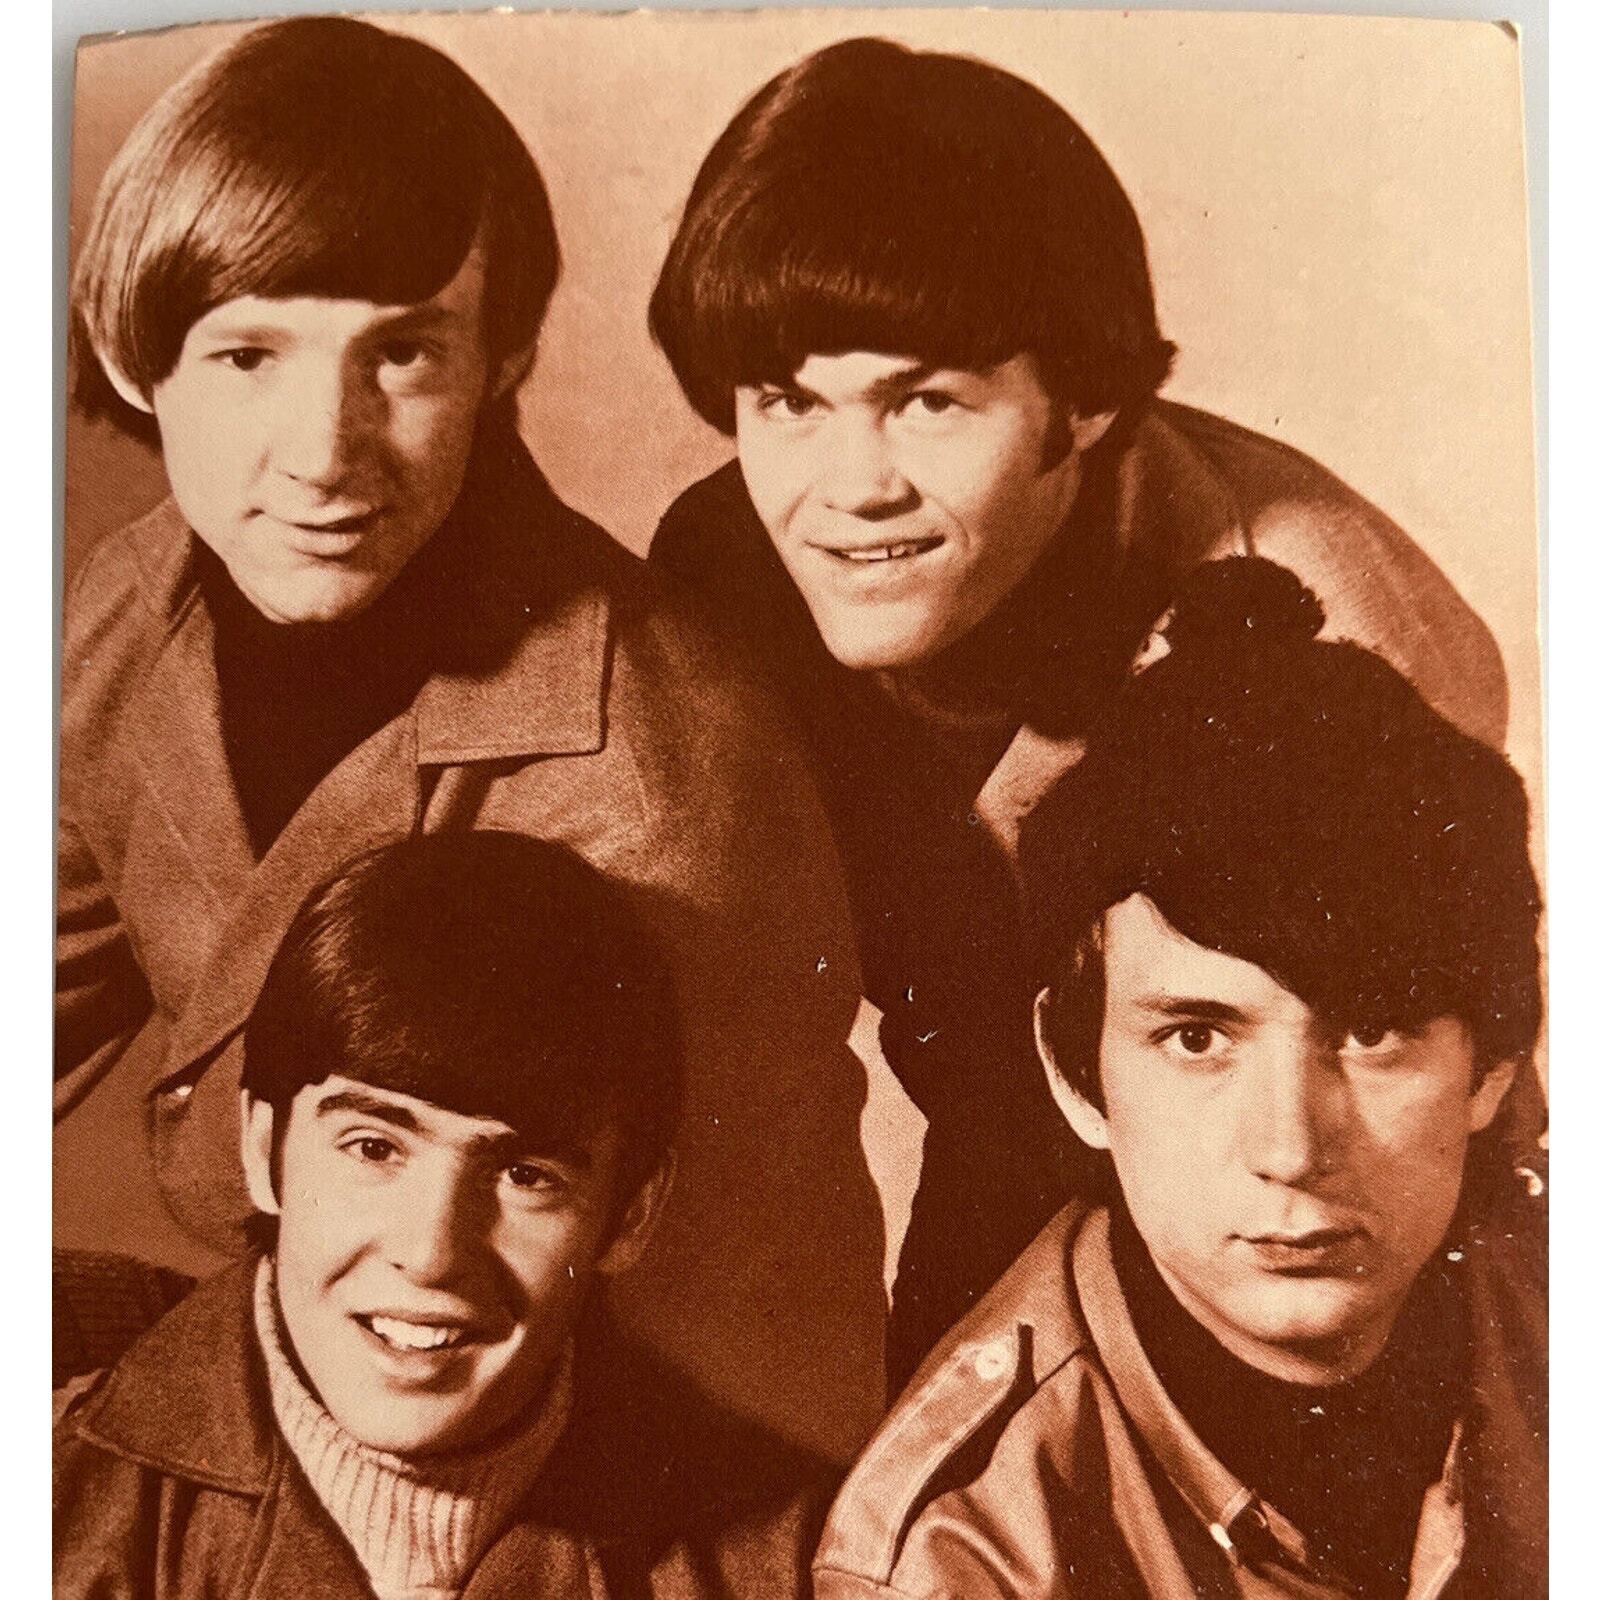 Vintage NOS 80s RPPC Postcard The Monkees Micky, Mikey, Davy, Peter Ludlow Sales